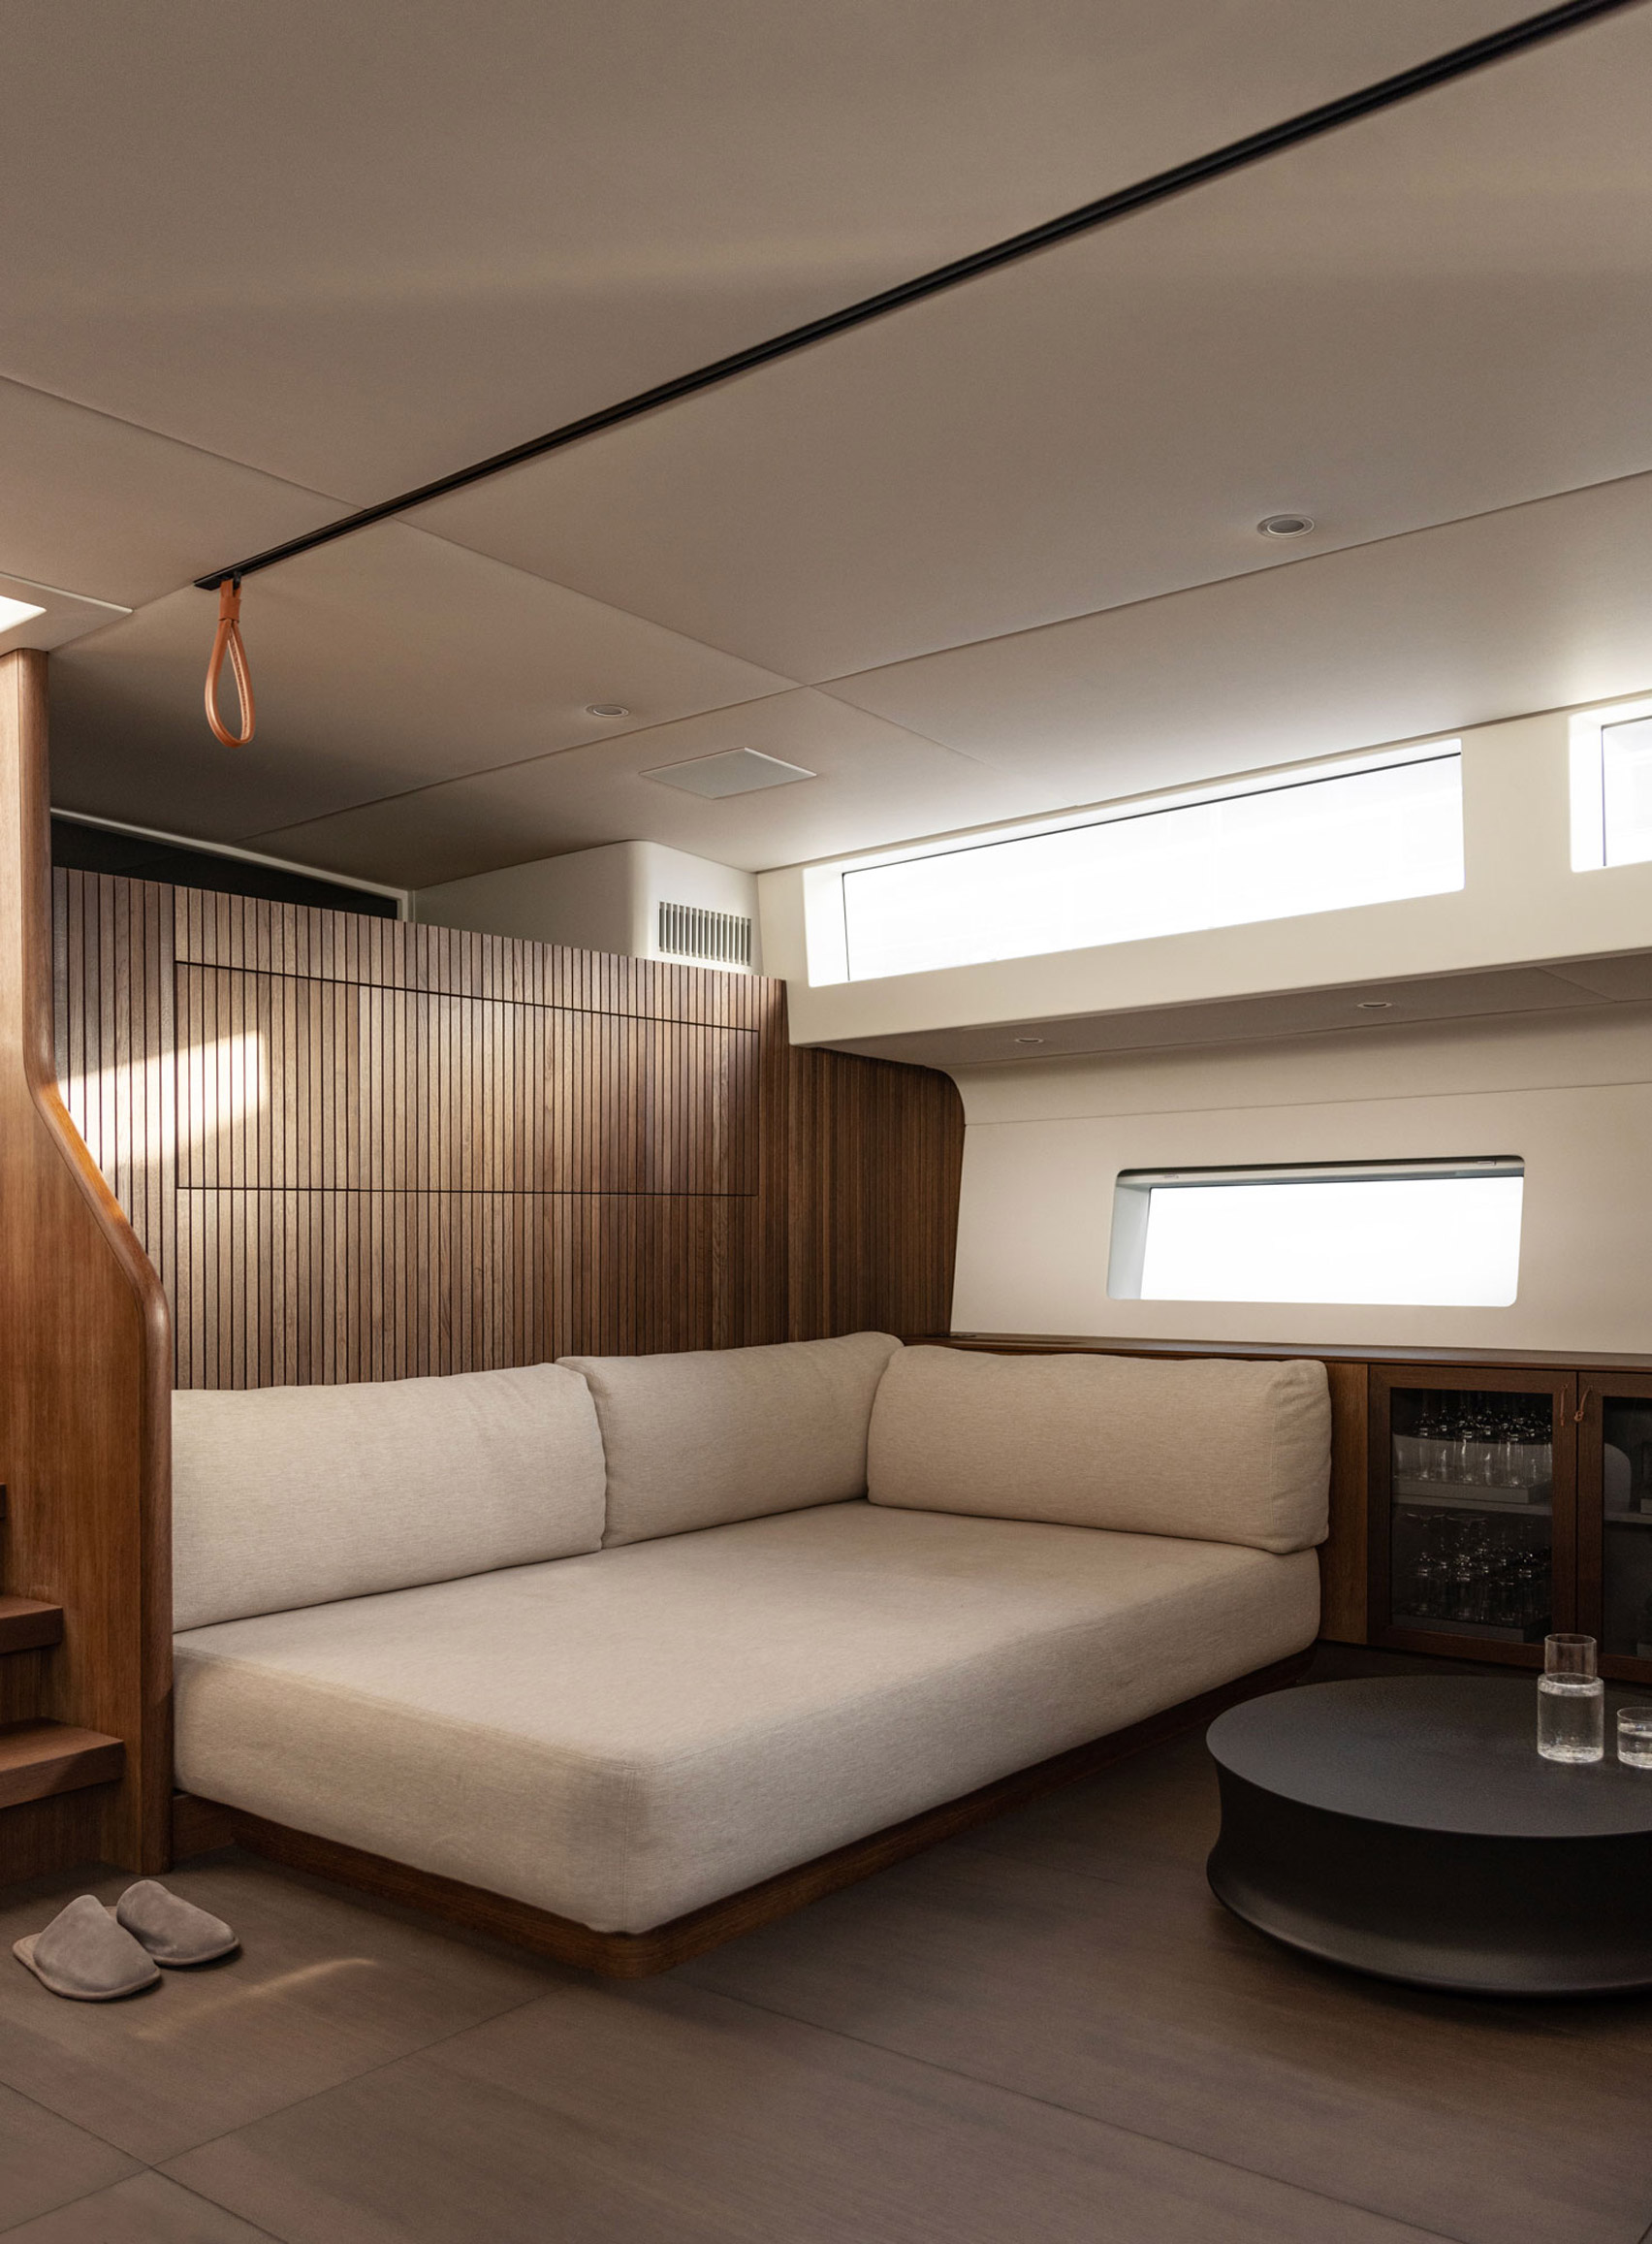 Lounge of yacht interior designed by Norm Architects